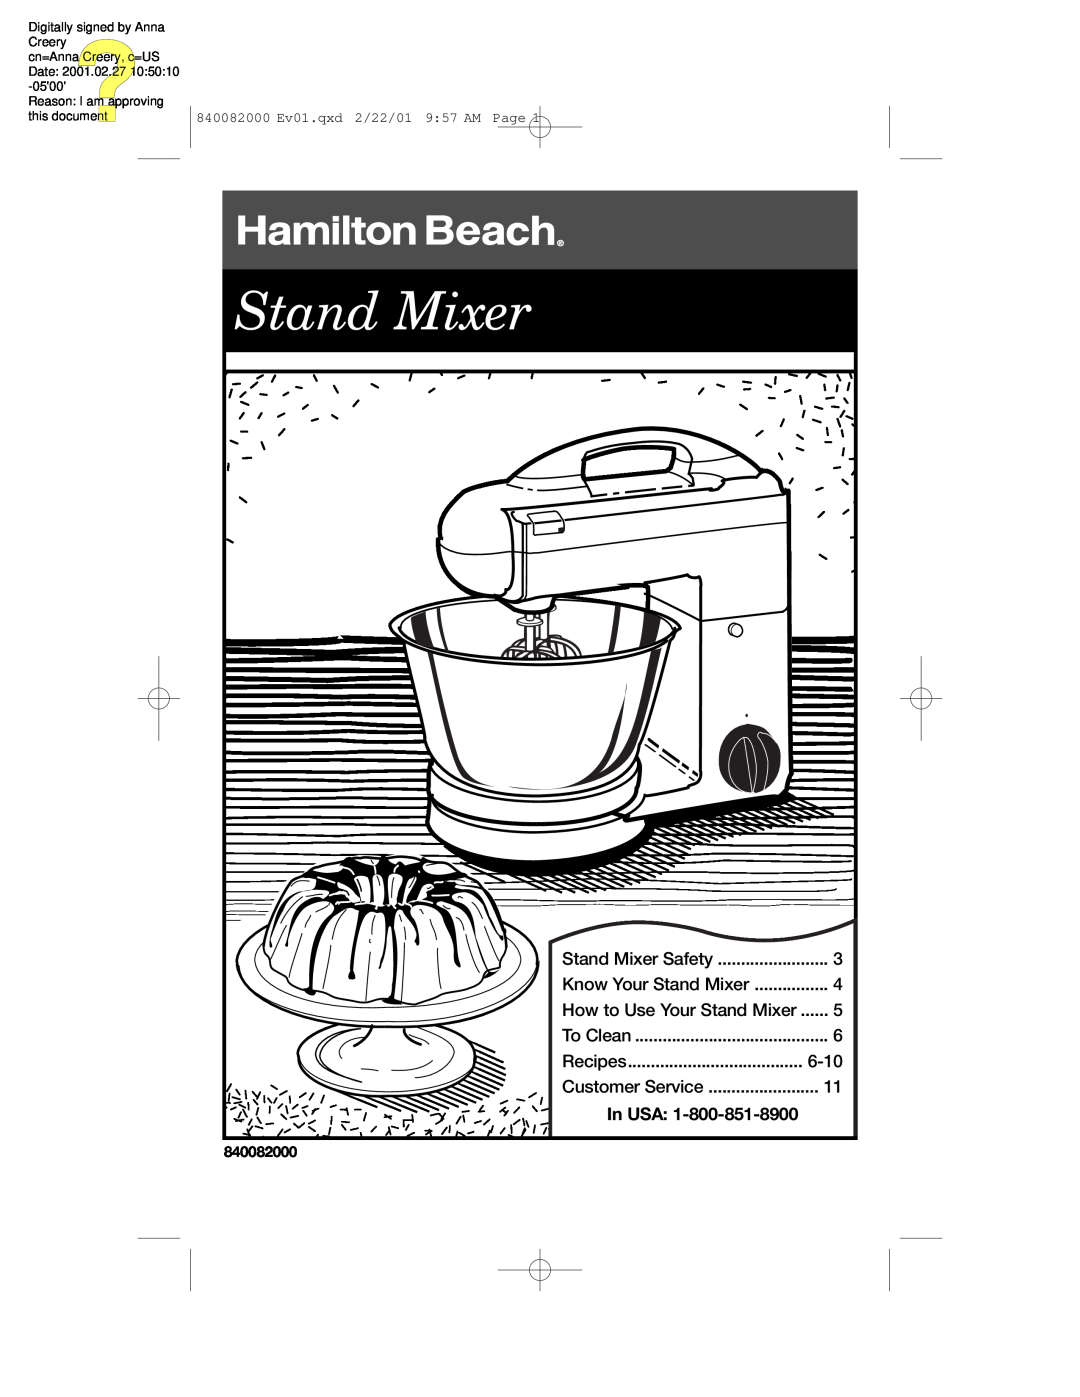 Hamilton Beach 60695 manual In USA, Stand Mixer, 840082000 Ev01.qxd 2/22/01 9 57 AM Page, Digitally signed by Anna Creery 